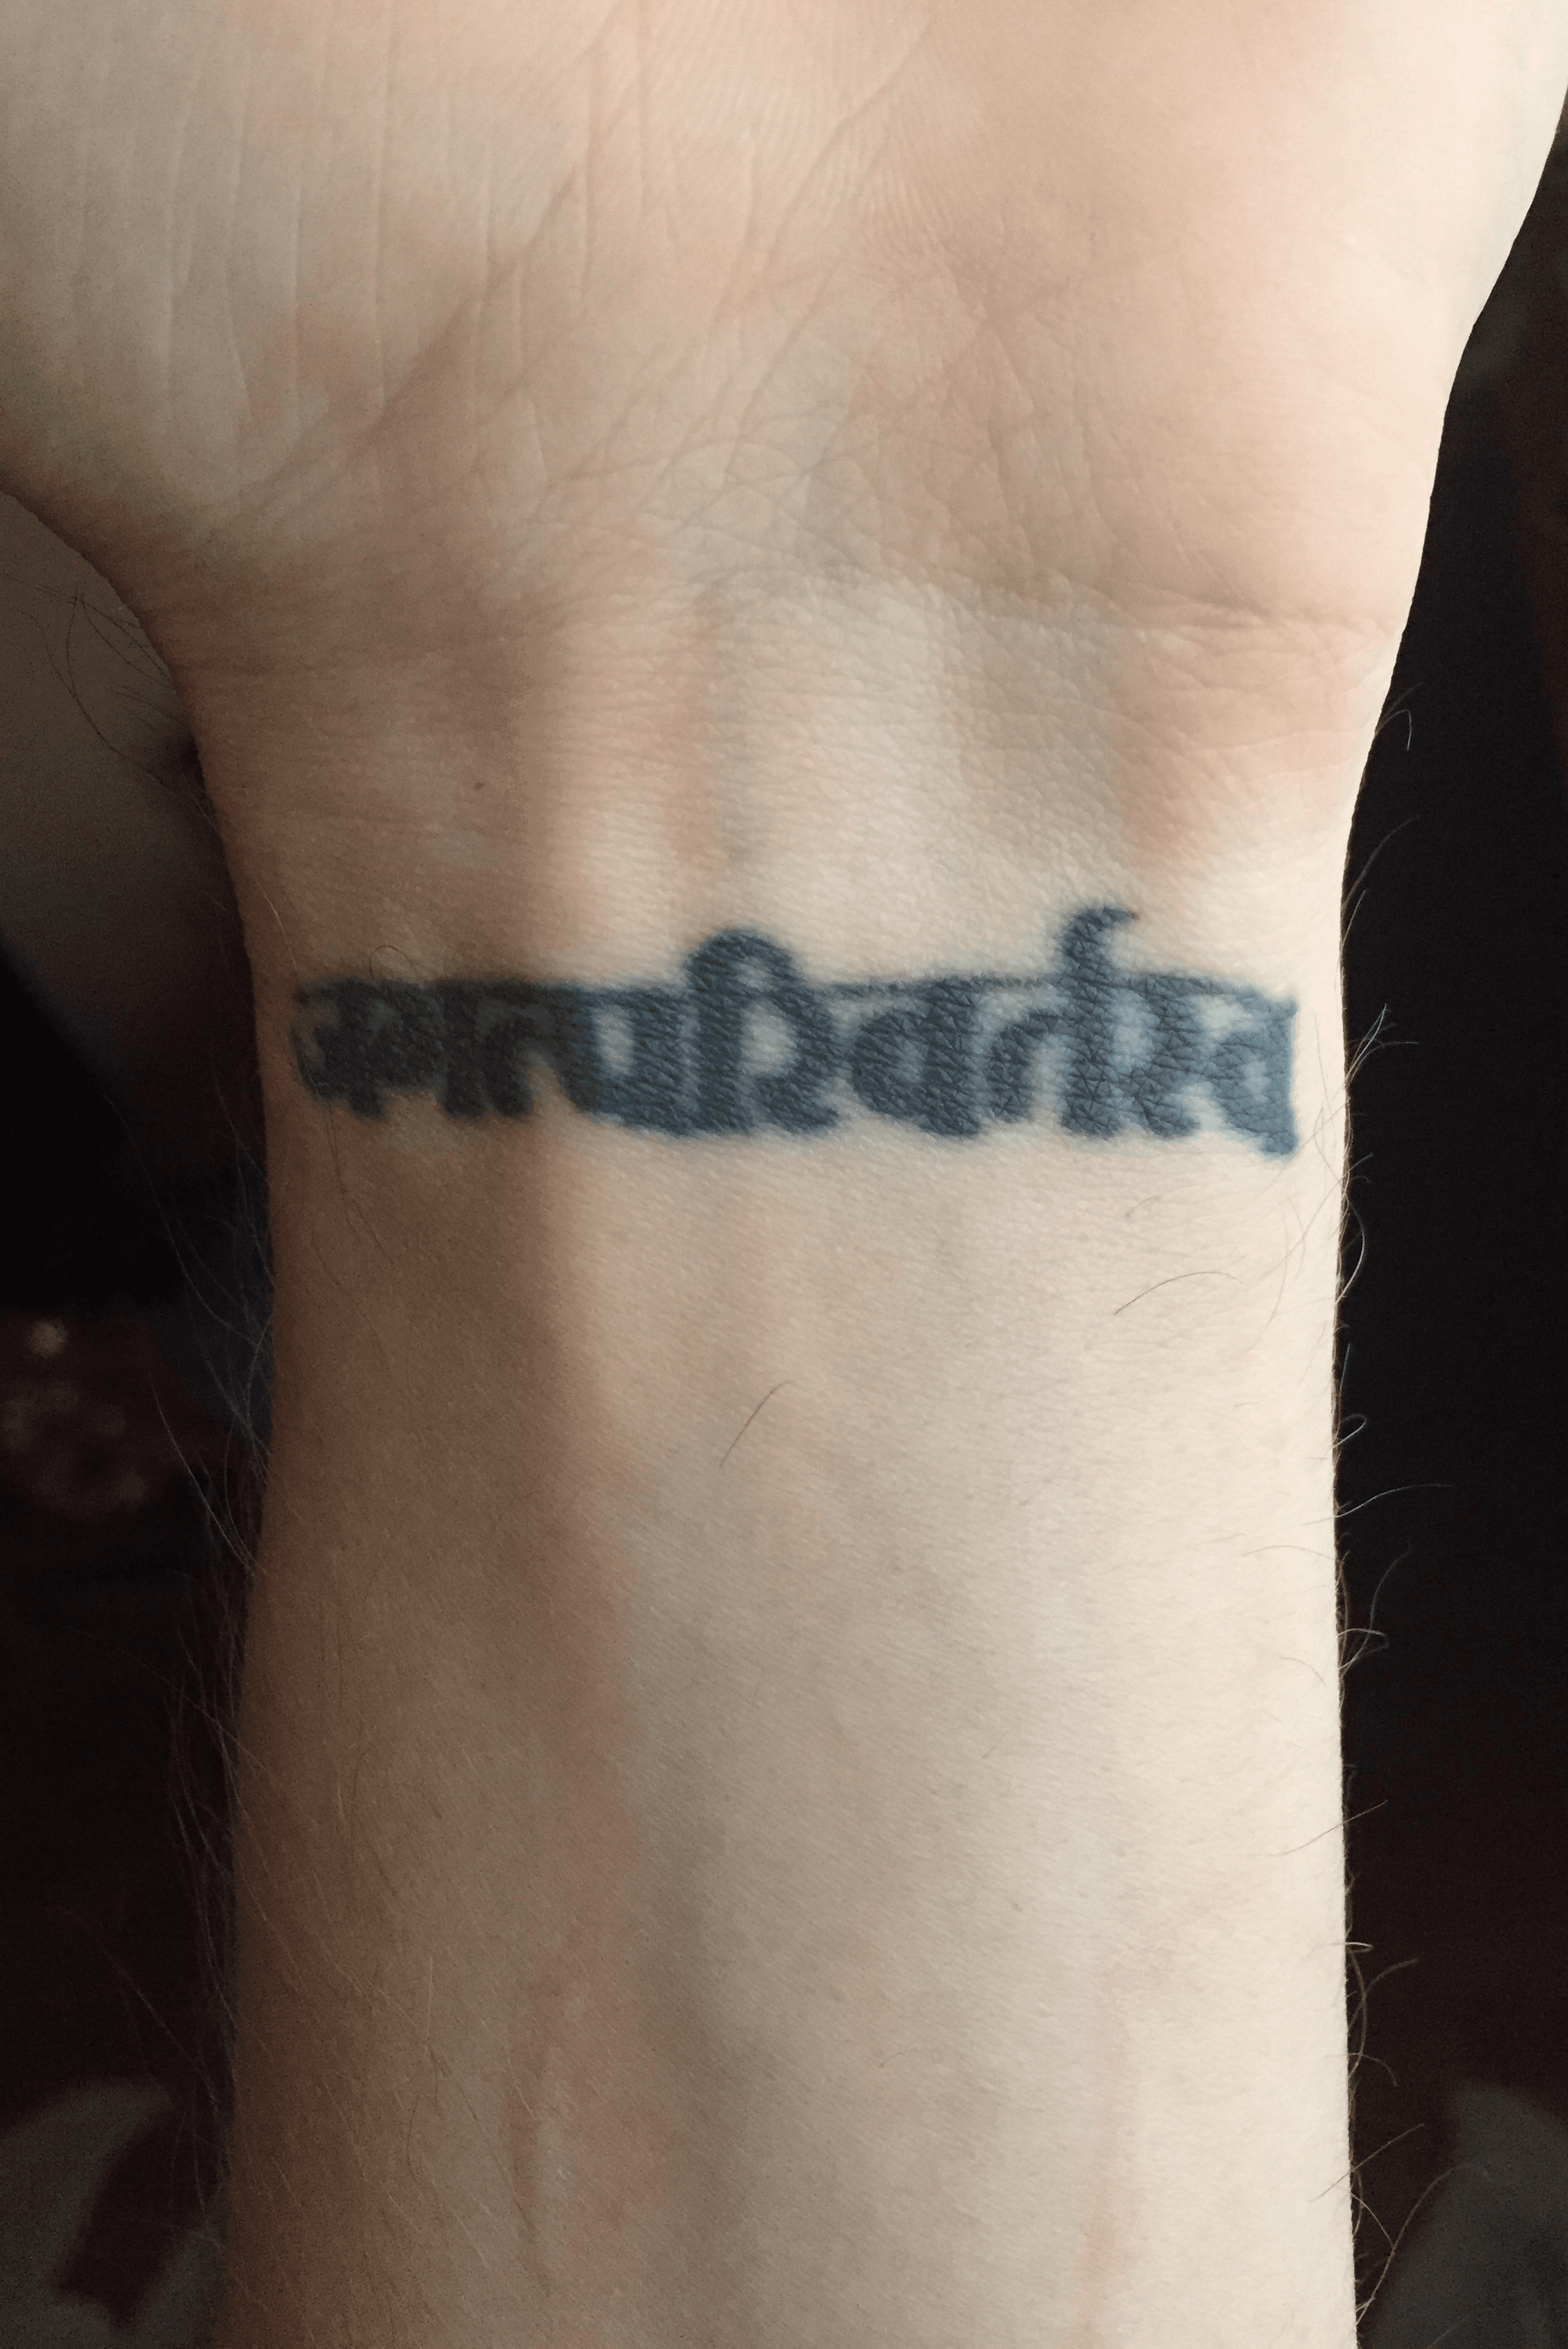 Why Should You Get A Sanskrit Tattoo? Meaning and Tattoo Ideas